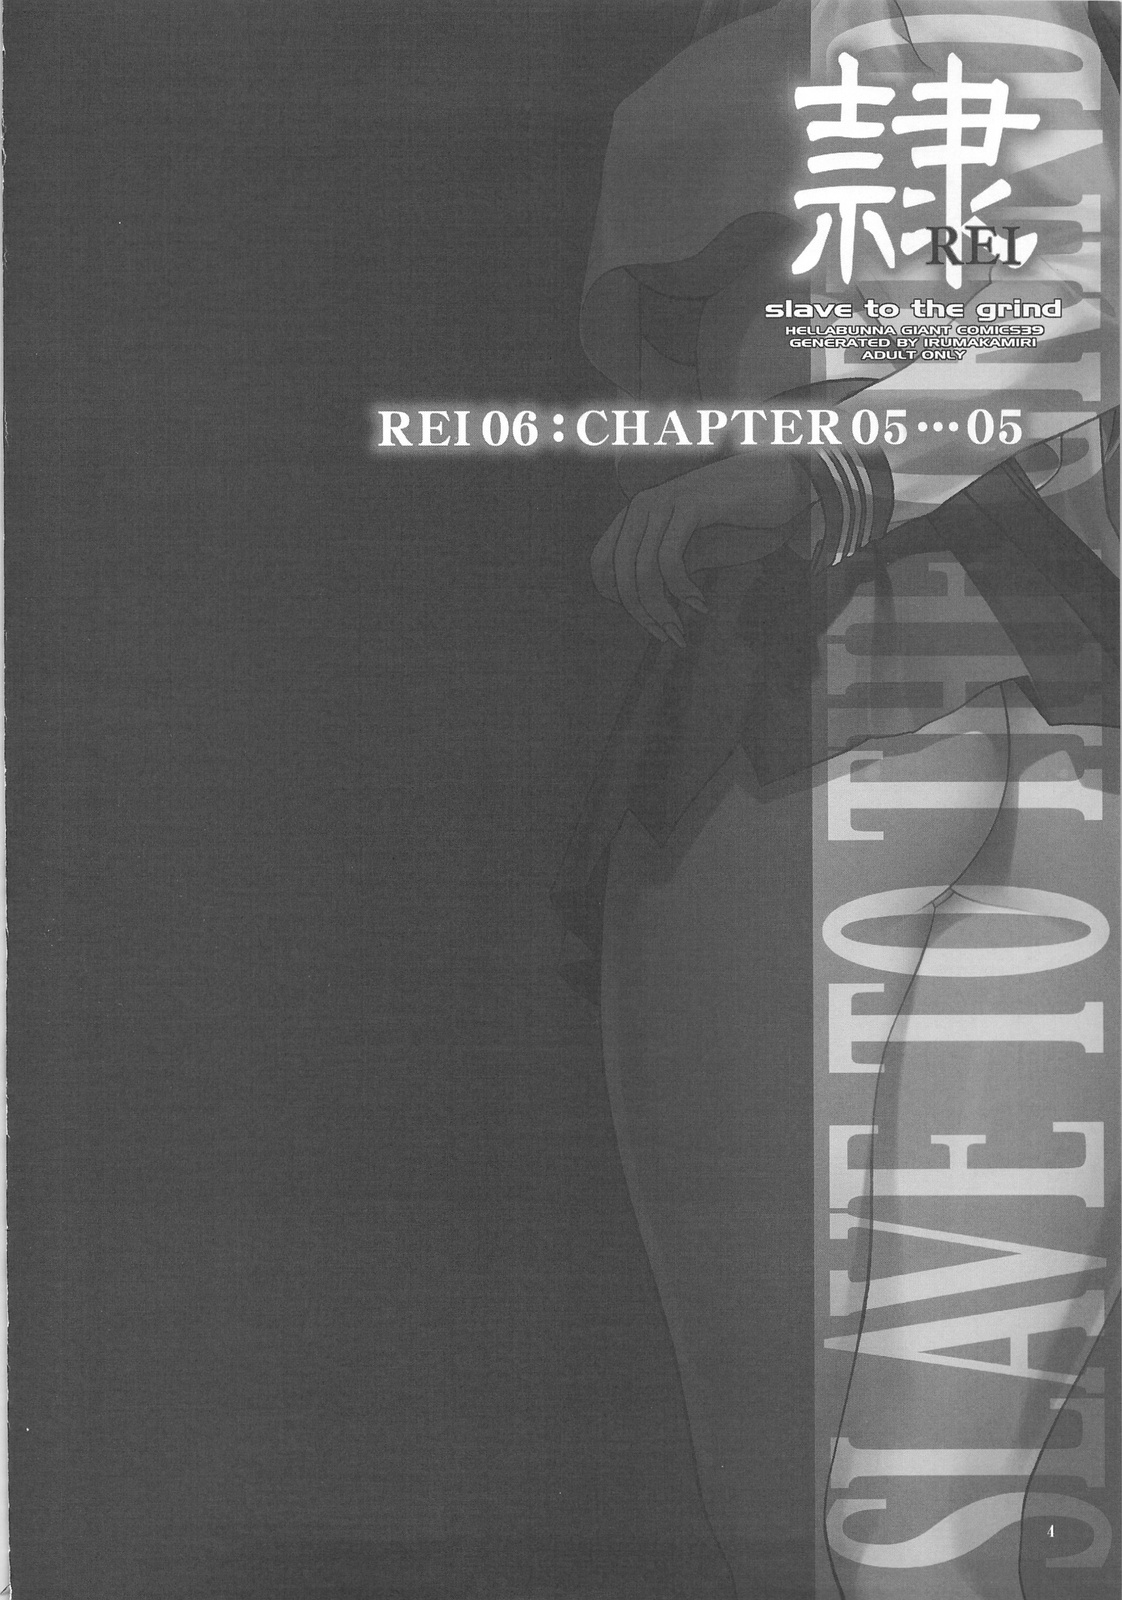 REI - slave to the grind - REI 06: CHAPTER 05 numero d'image 2